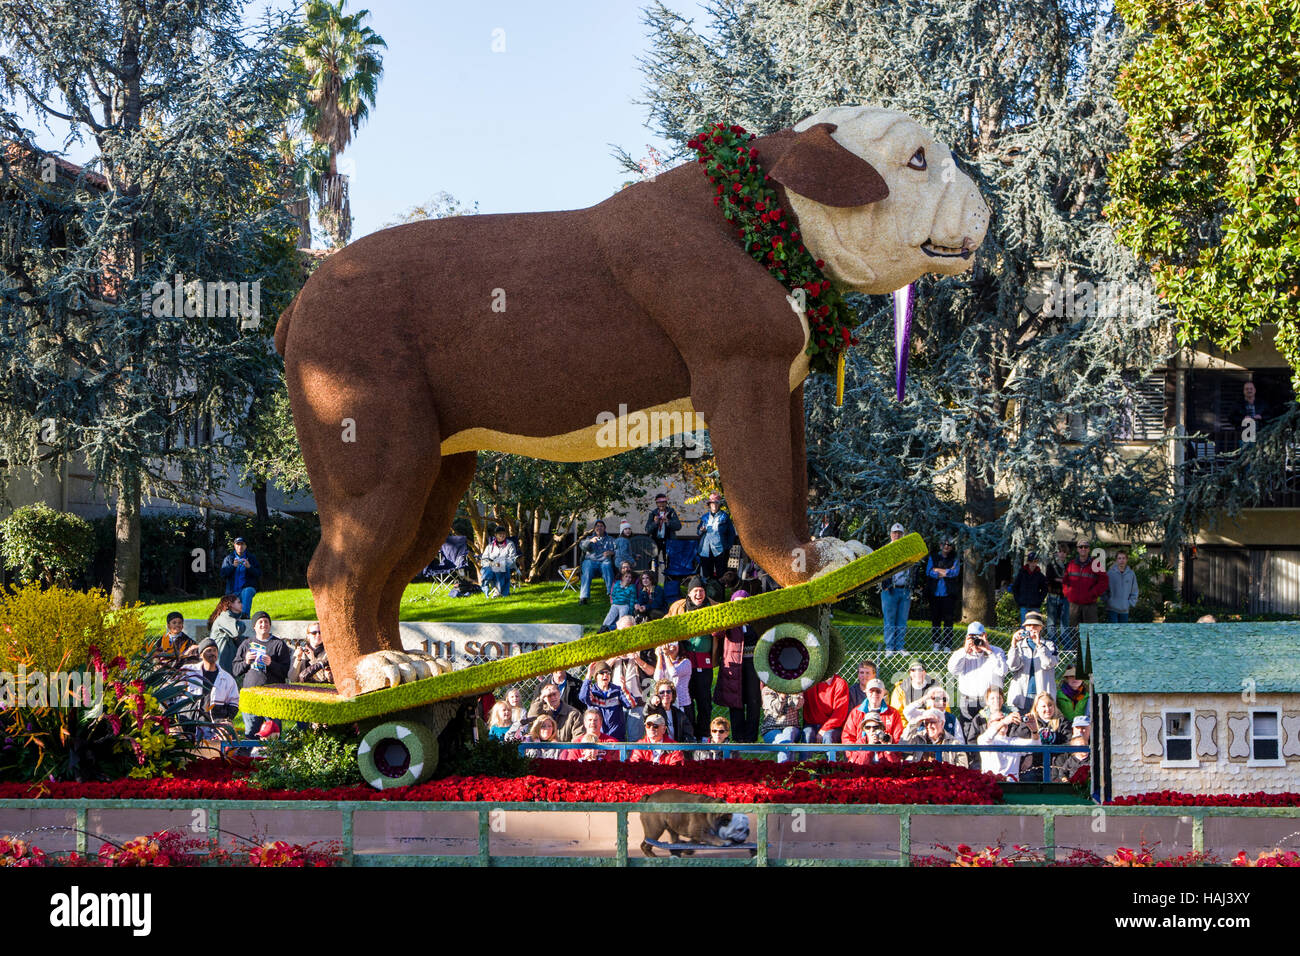 Large dog skateboarding on float decorated with flowers in the annual New Years Day Rose Bowl Parade, Pasadena, California, USA Stock Photo